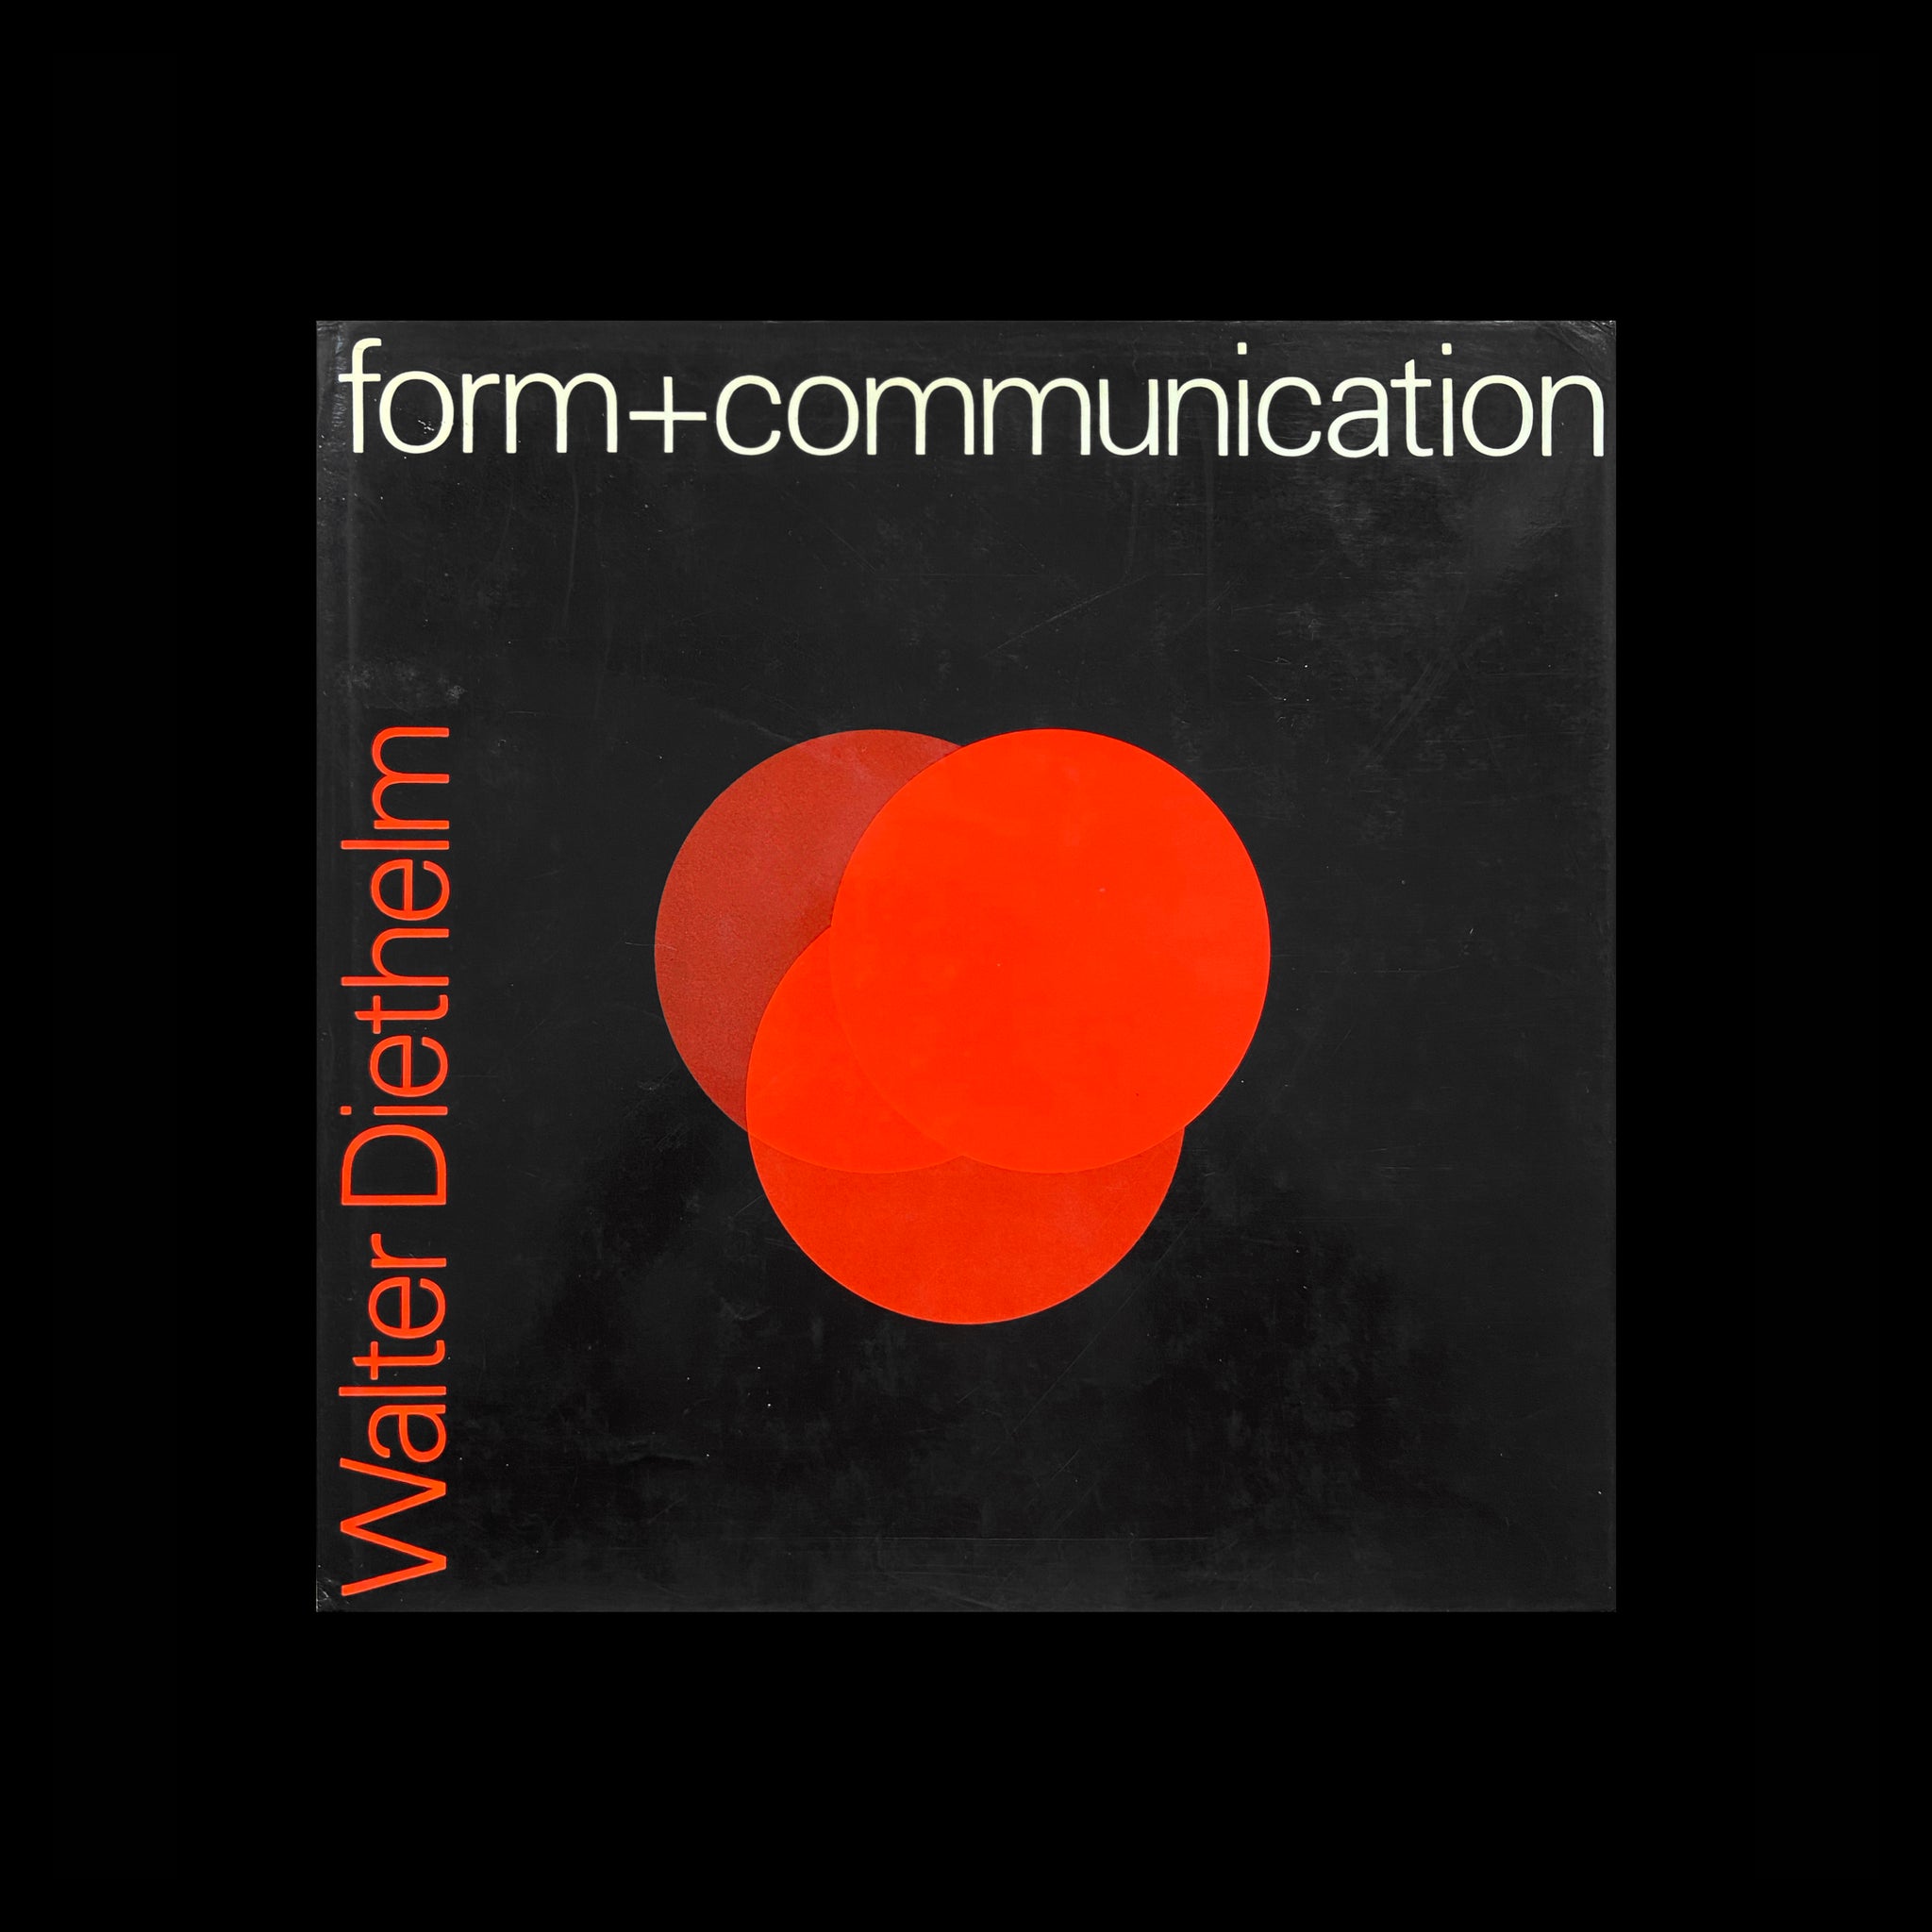 Form + Communication by Walter Diethelm, 1972